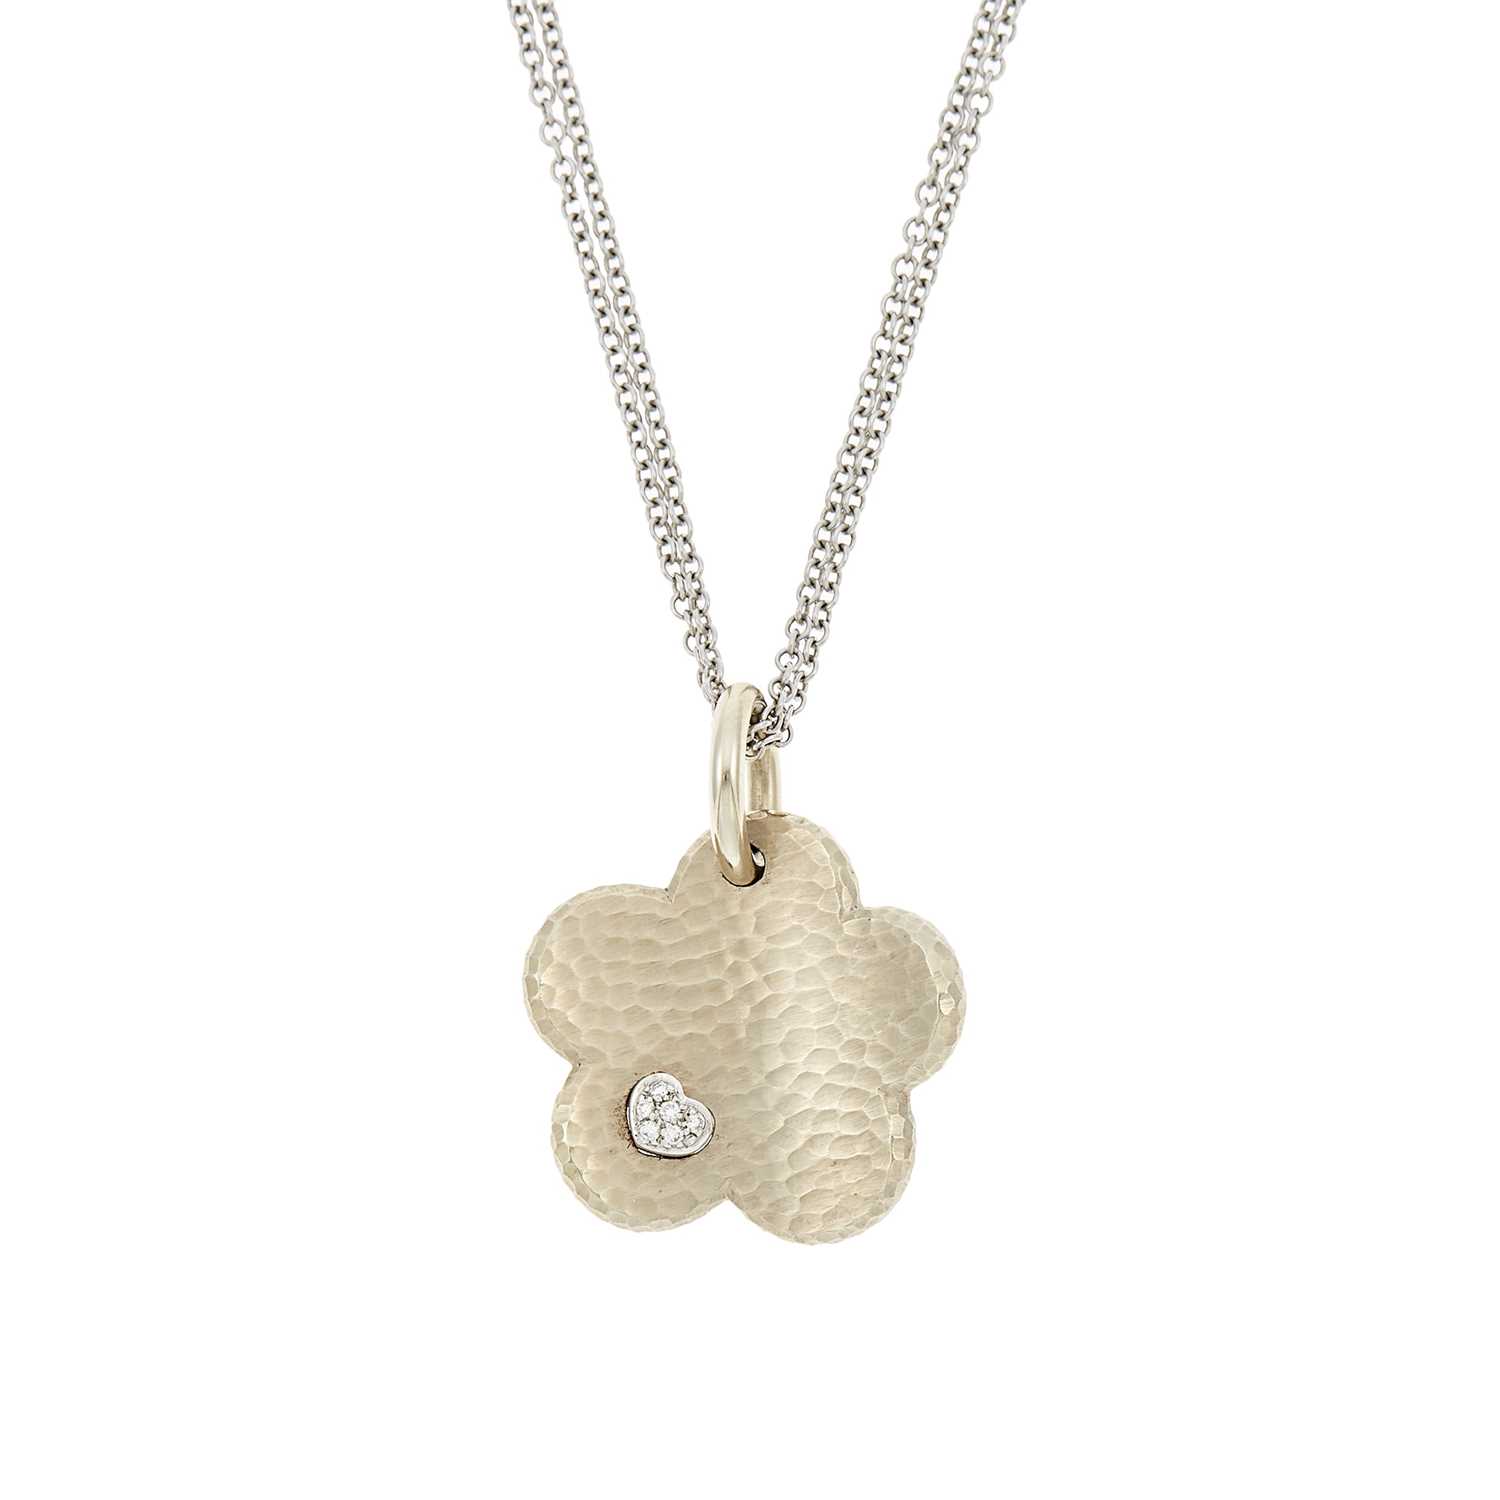 Lot 1268 - Gold and Diamond Flower Pendant with White Gold Chain Necklace